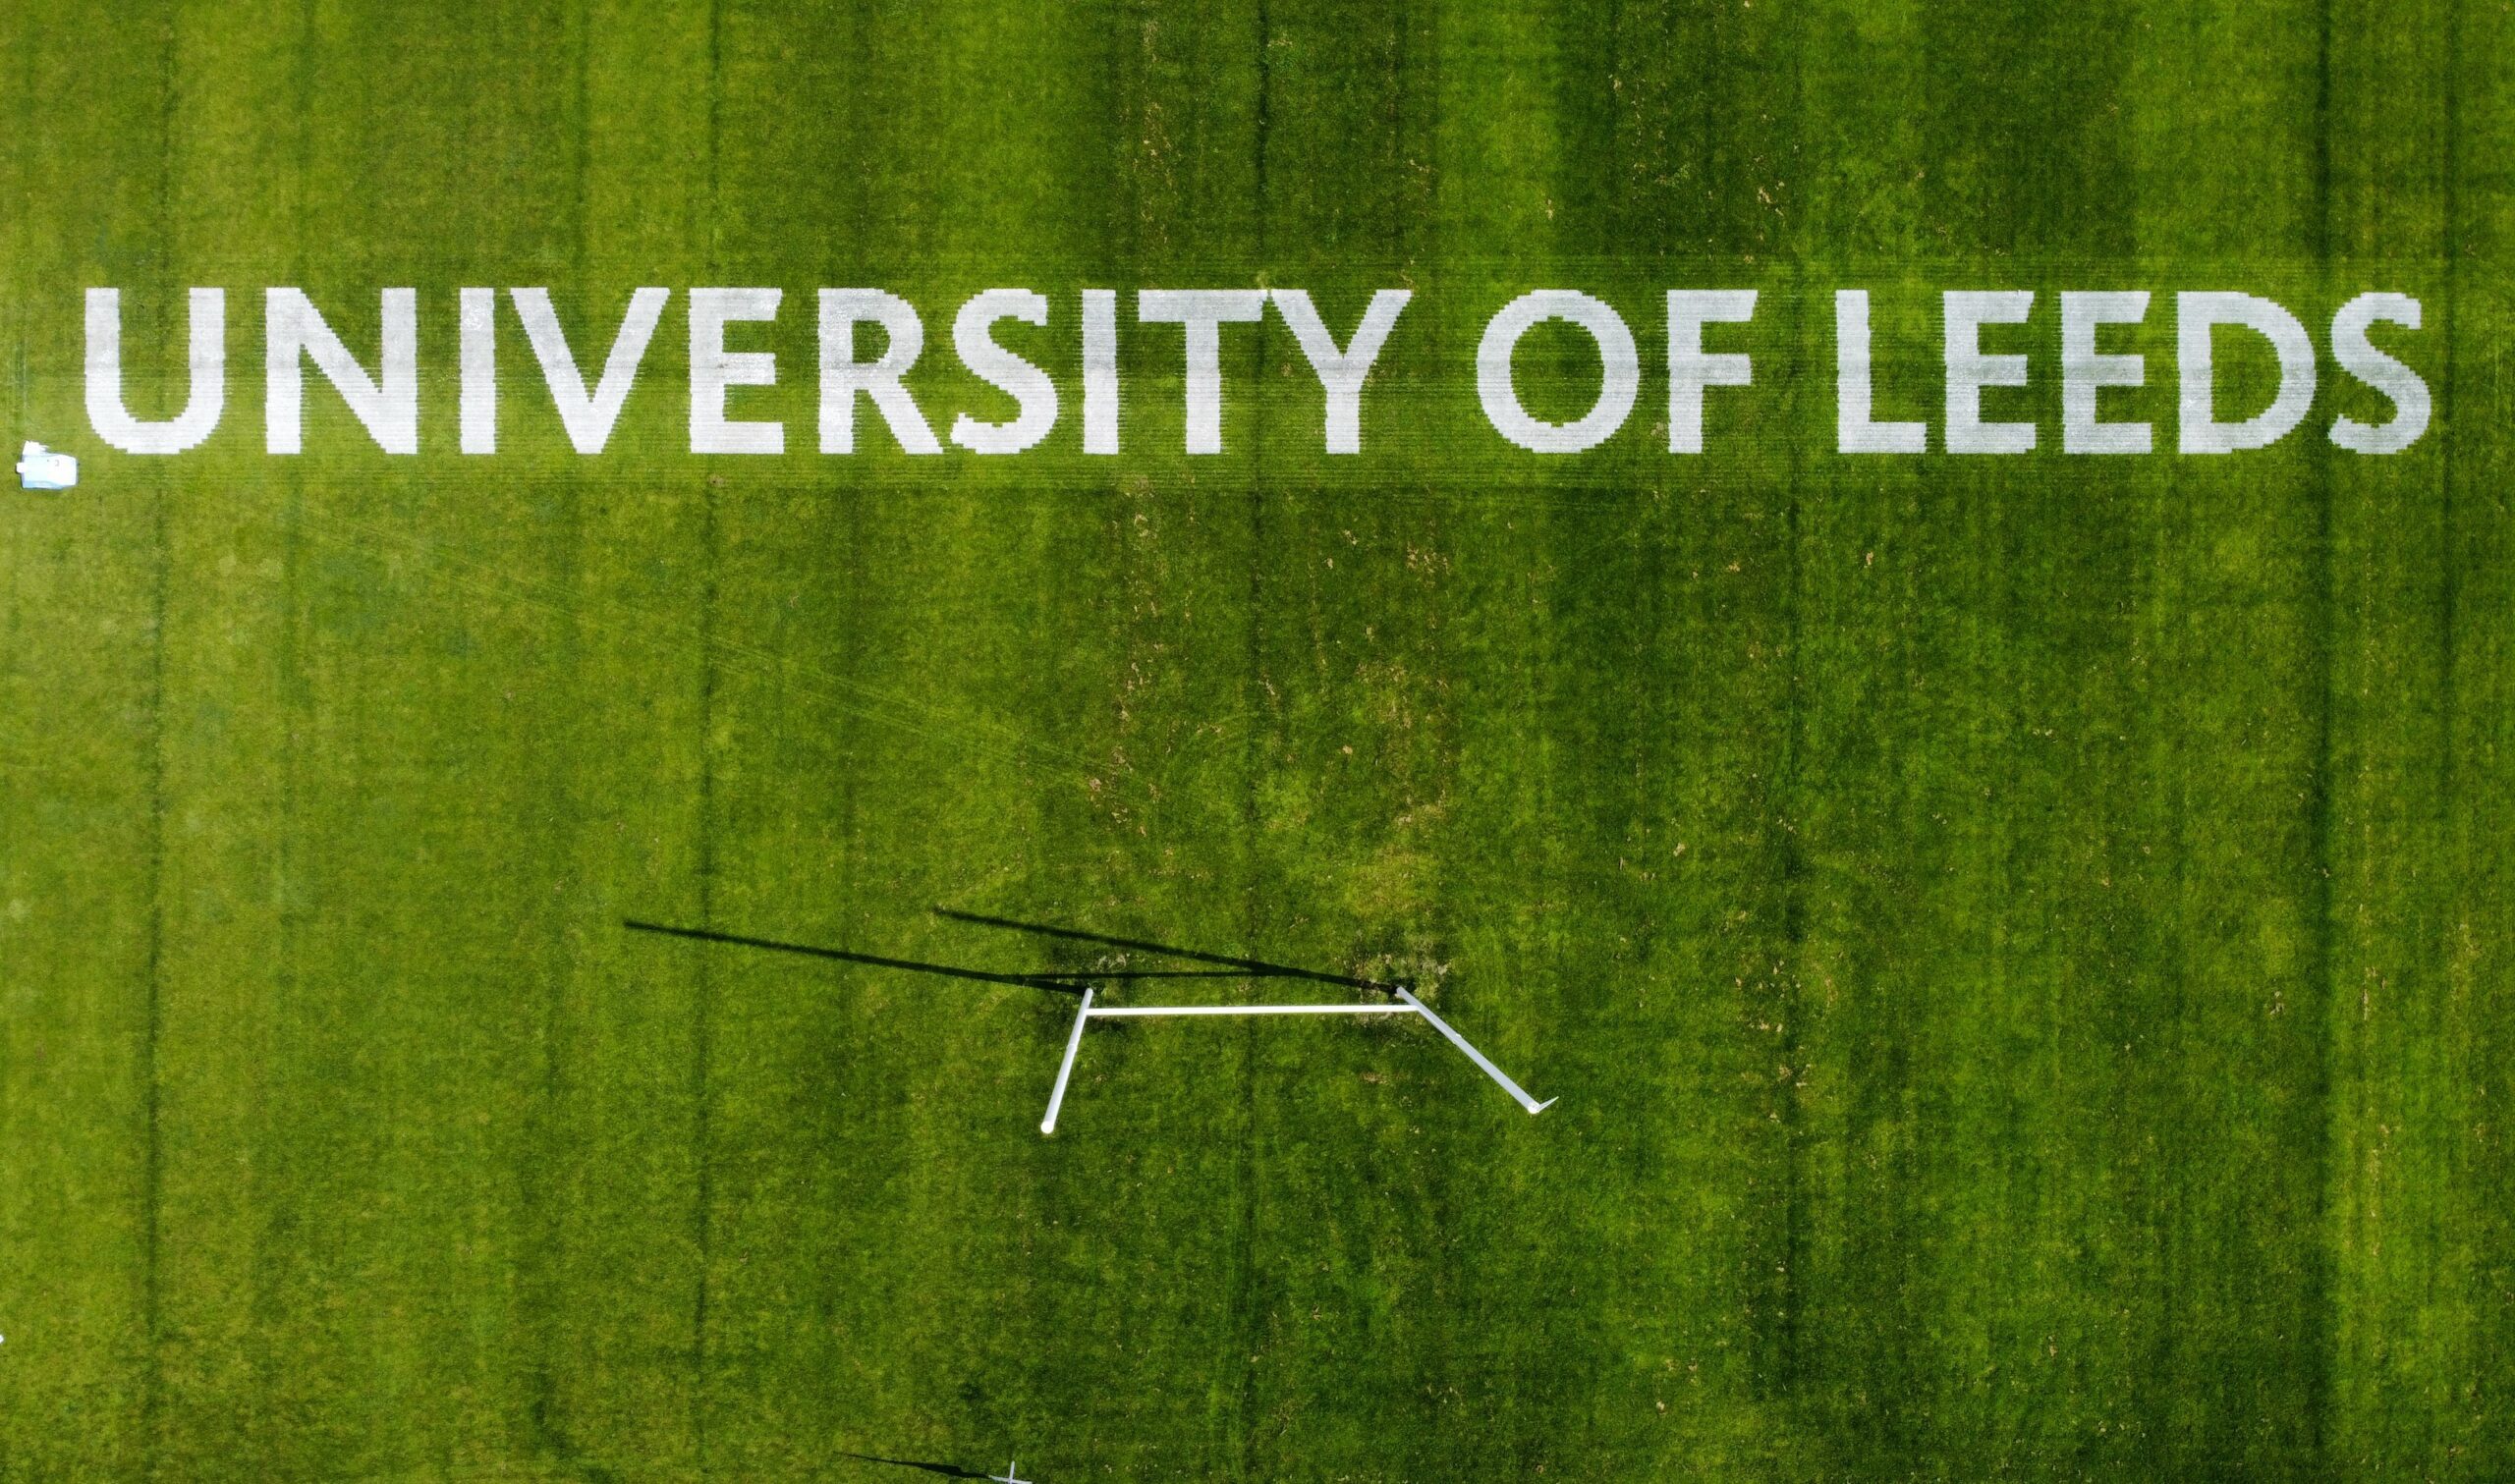 University of leeds rugby field and logo from above